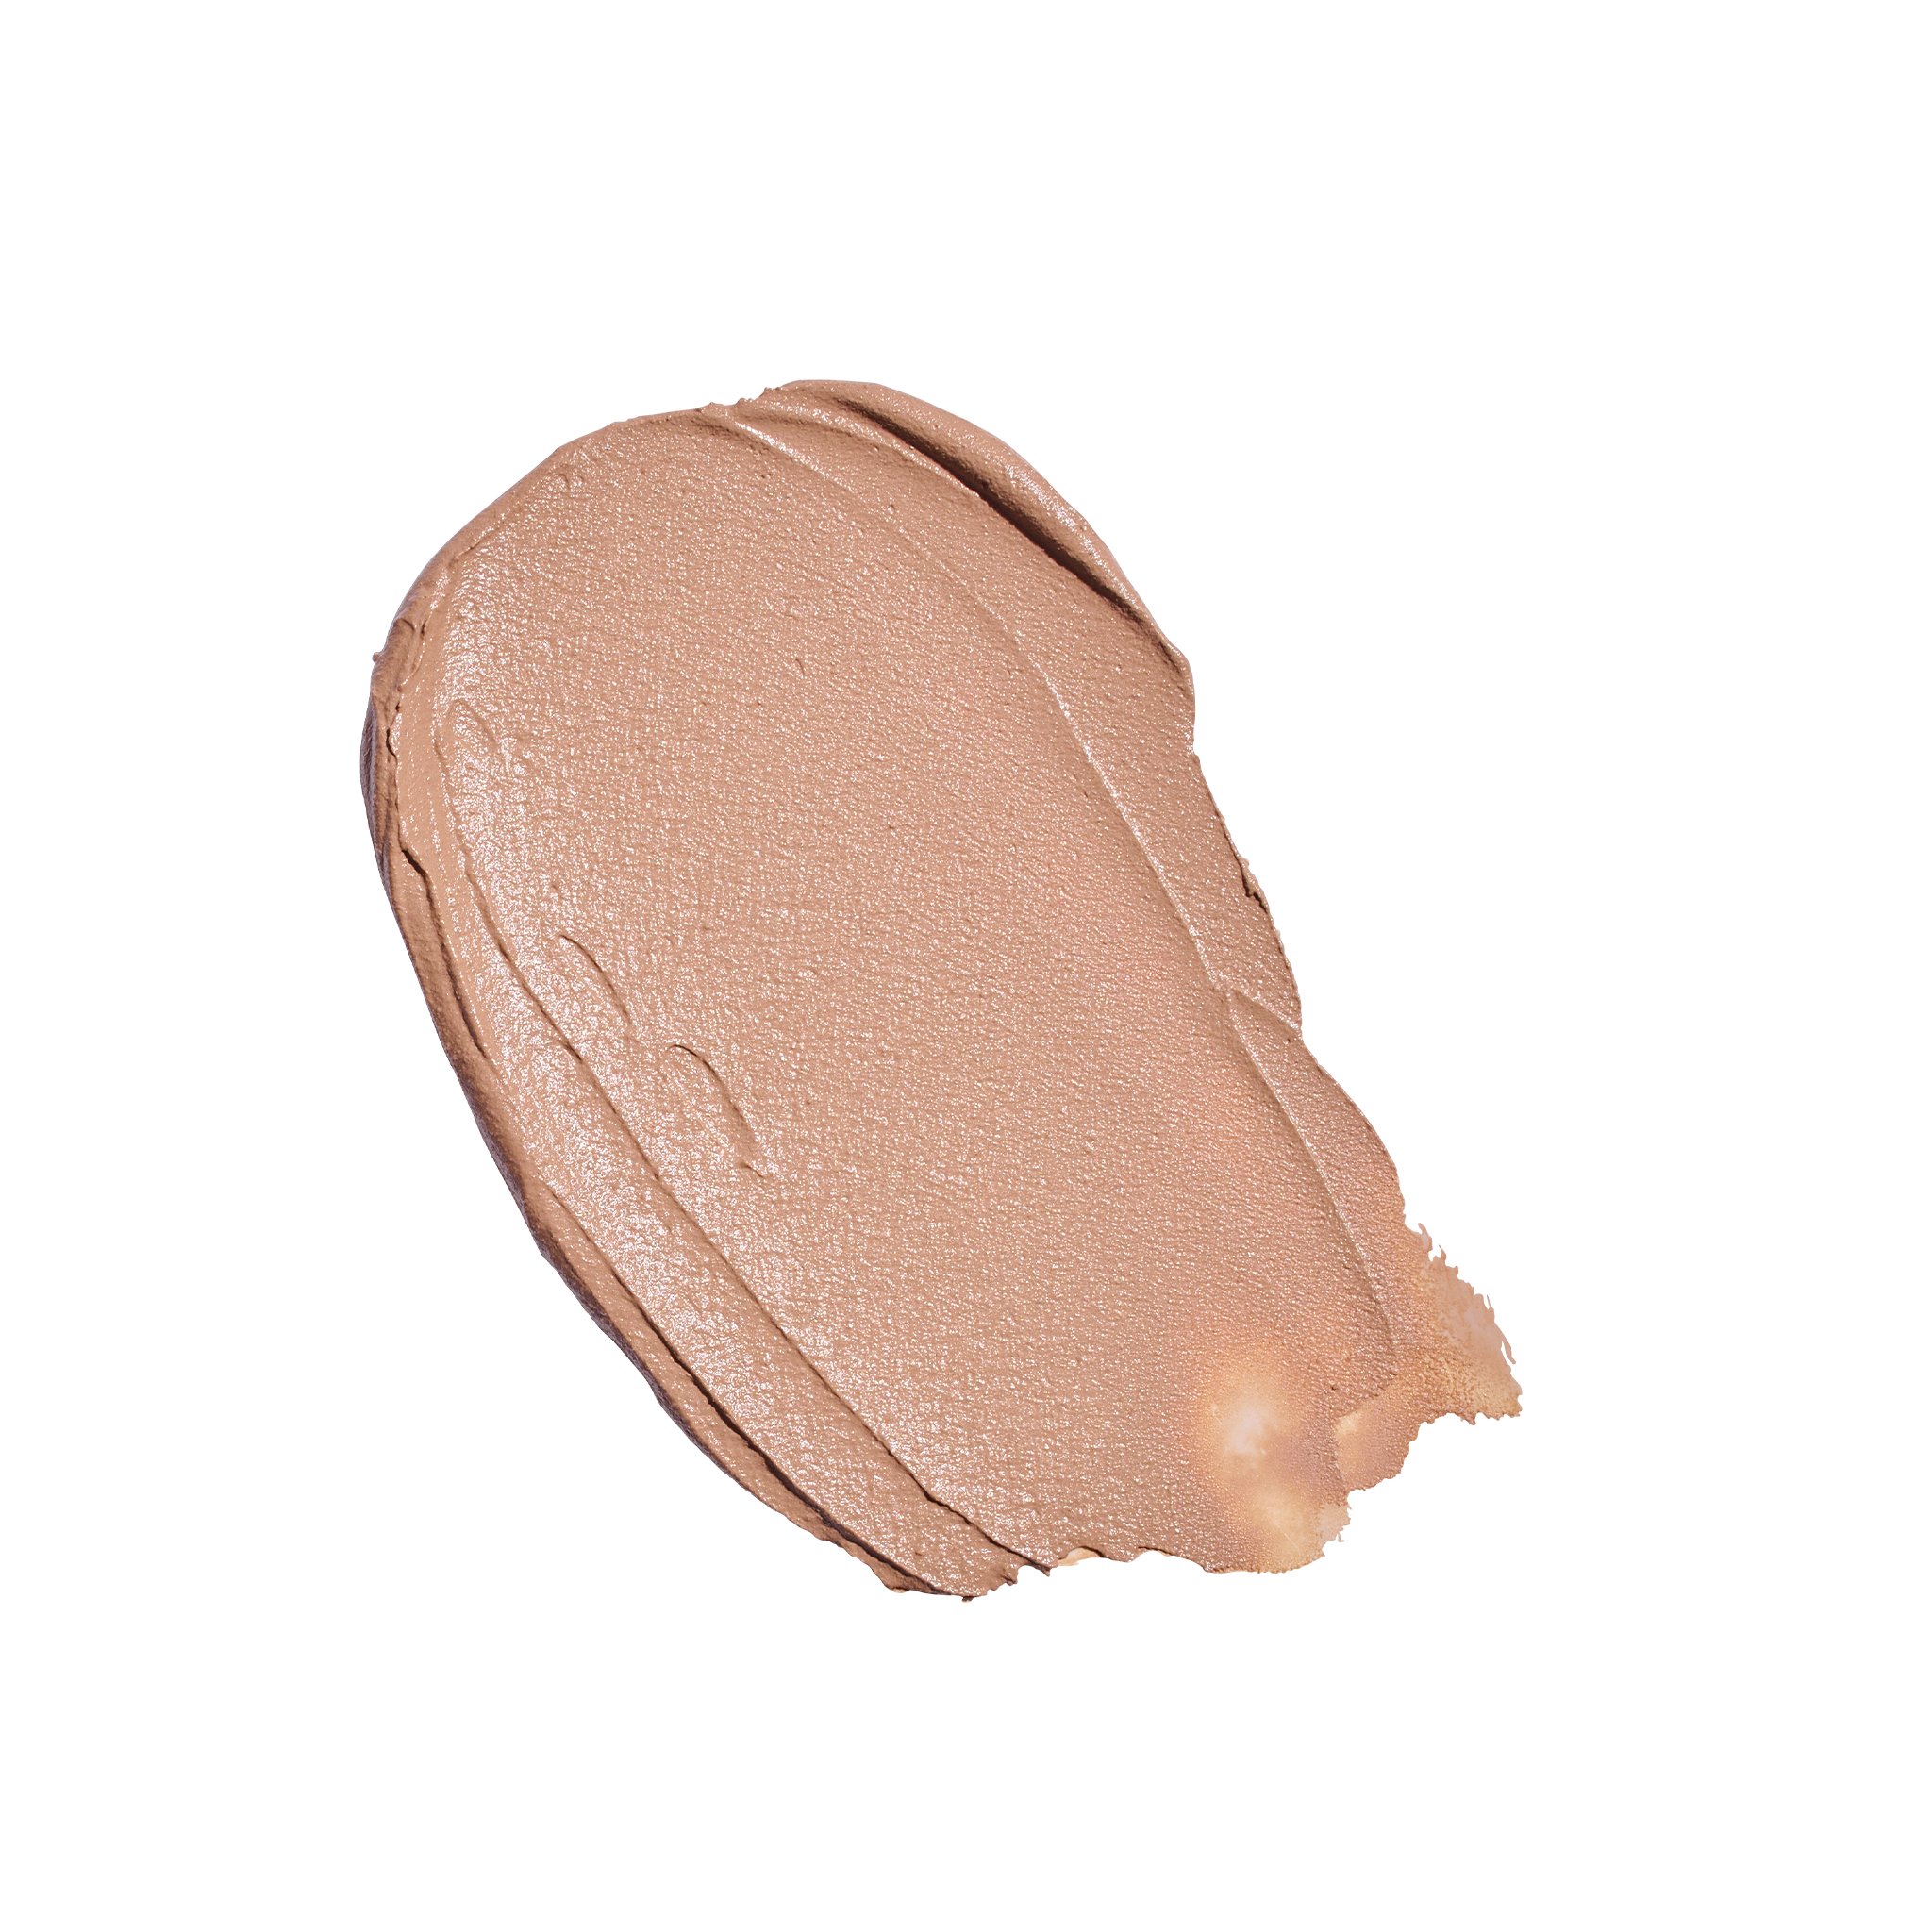 Tint du Soleil™ Whipped Mineral Foundation SPF 30 swatch || Tan